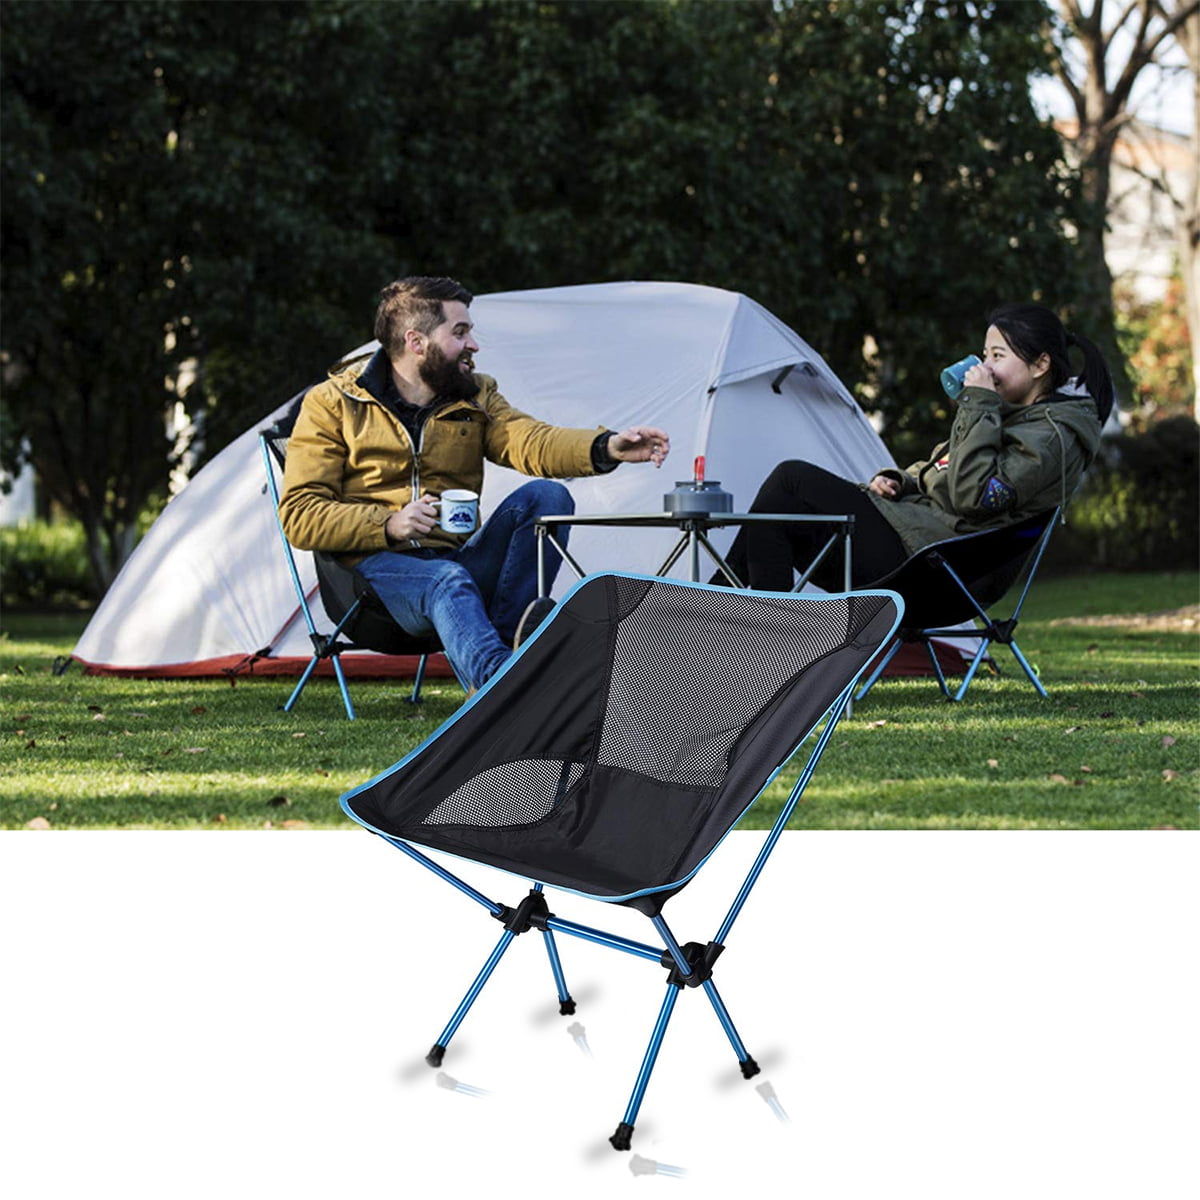 Portable Hiking Camping Folding Chair Compact Outdoor Fishing Camping BBQ Chair